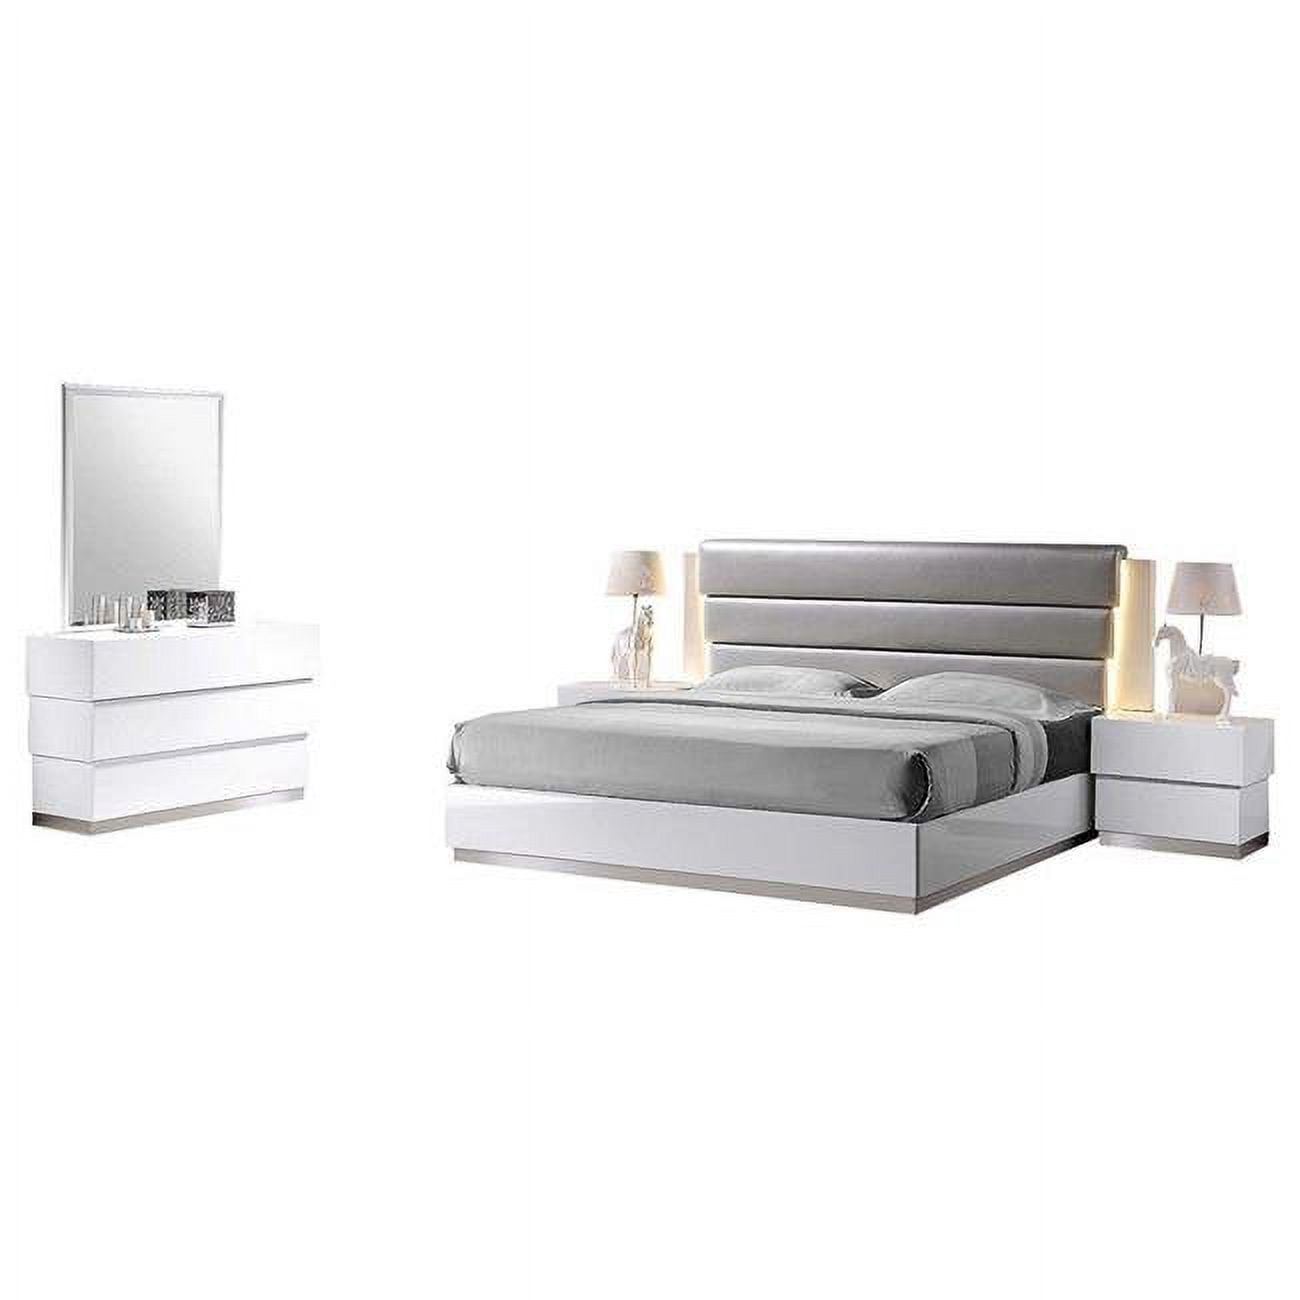 Florence Cal King 5 Pcs Florence White Lacquer & Gray Leather Headboard Bed Set - California King